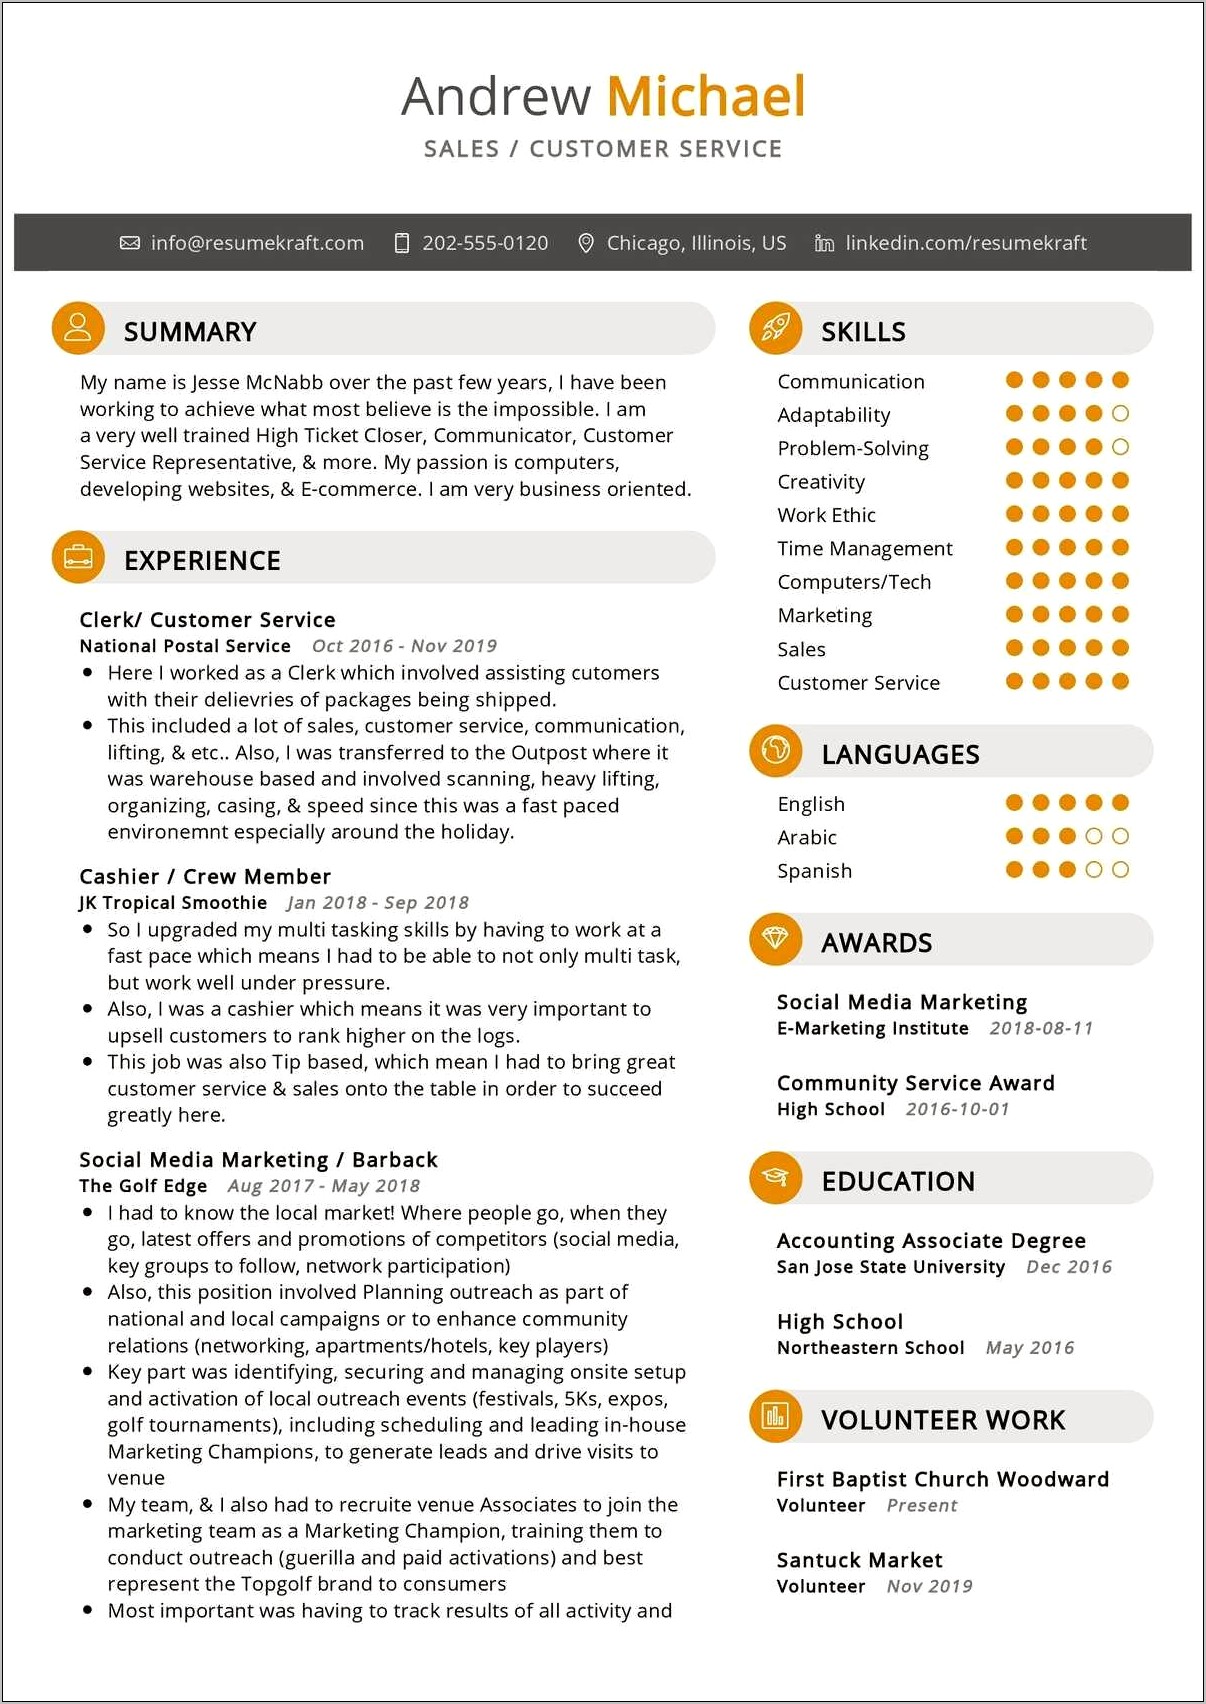 Resume Examples For Sales And Customer Service